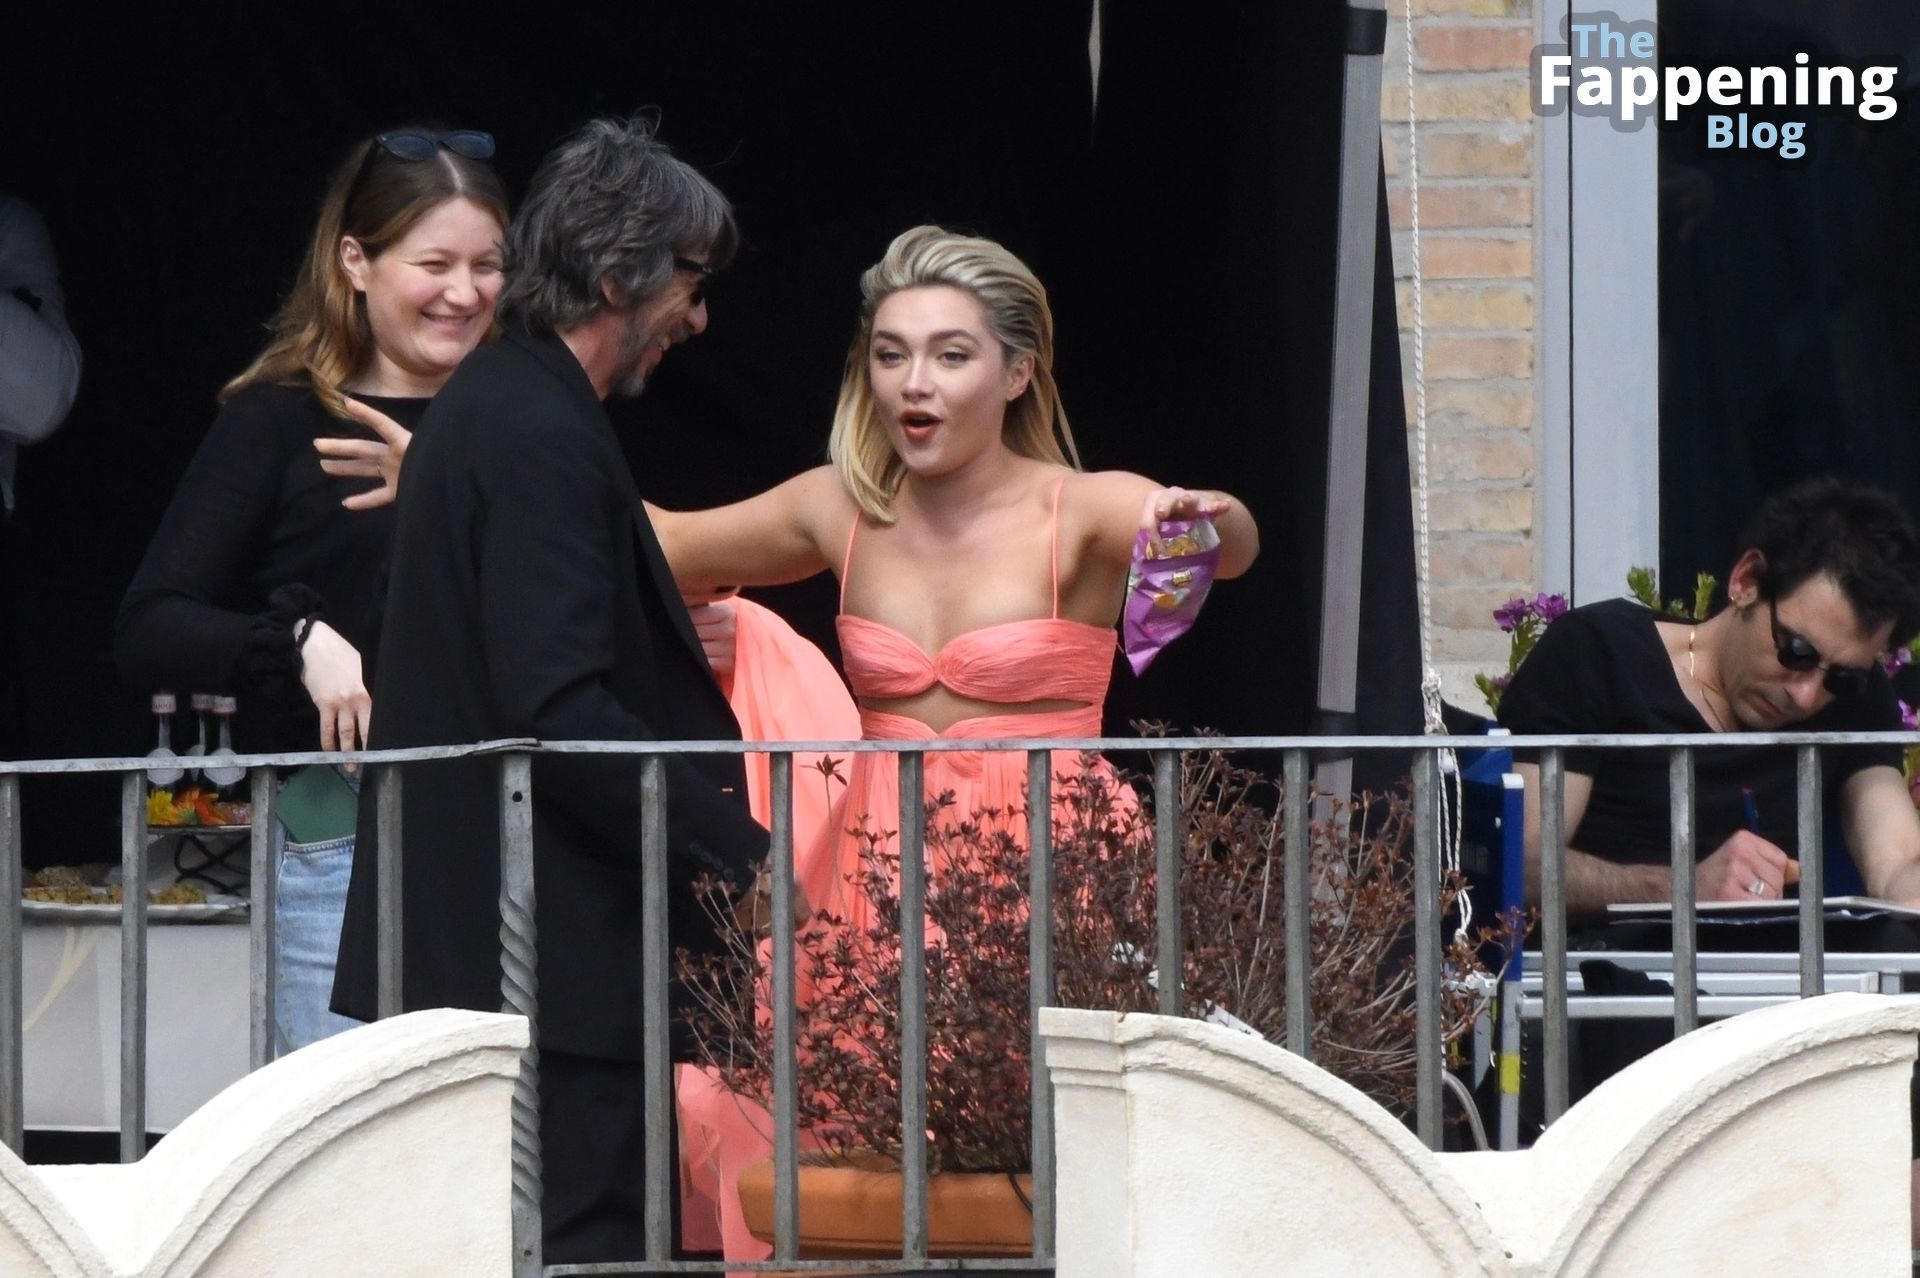 Braless Florence Pugh Looks Sexy in a Fashion Shoot (95 New Photos)